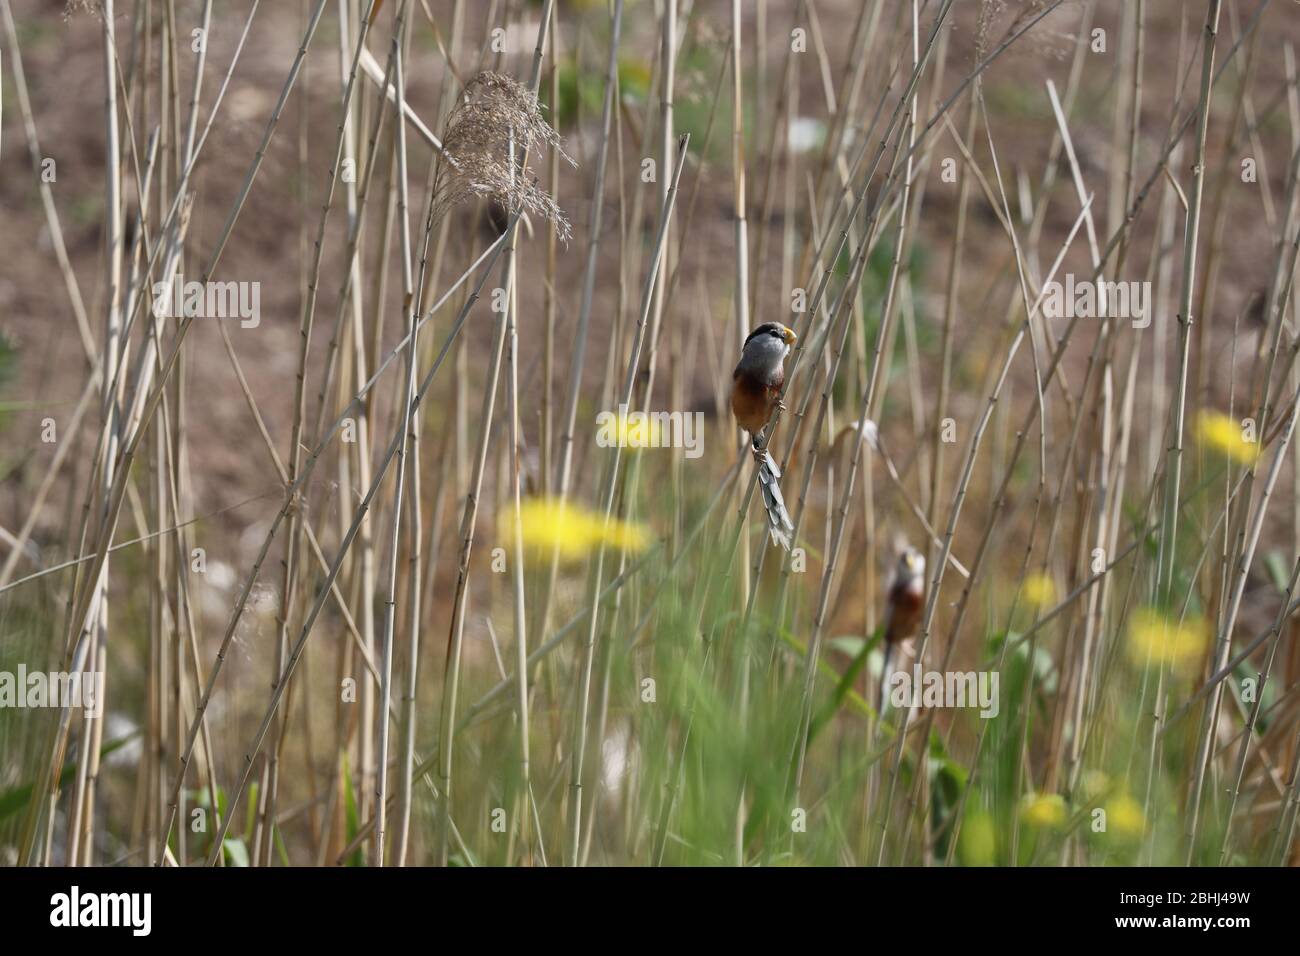 Lianyungang, China's Jiangsu Province. 23rd Apr, 2020. Reed parrotbills perch on straw in Lianyungang, east China's Jiangsu Province, April 23, 2020. A biodiversity survey team said Sunday that they have found more than 50 reed parrotbills in an area of marshland in Lianyungang City. Reed parrotbills mainly inhabit reed marshes and similar habitats in coastal areas of east China, and the species was classified as near threatened by the International Union for Conservation of Nature's Red List of Threatened Species. Credit: Yang Shixiong/Xinhua/Alamy Live News Stock Photo